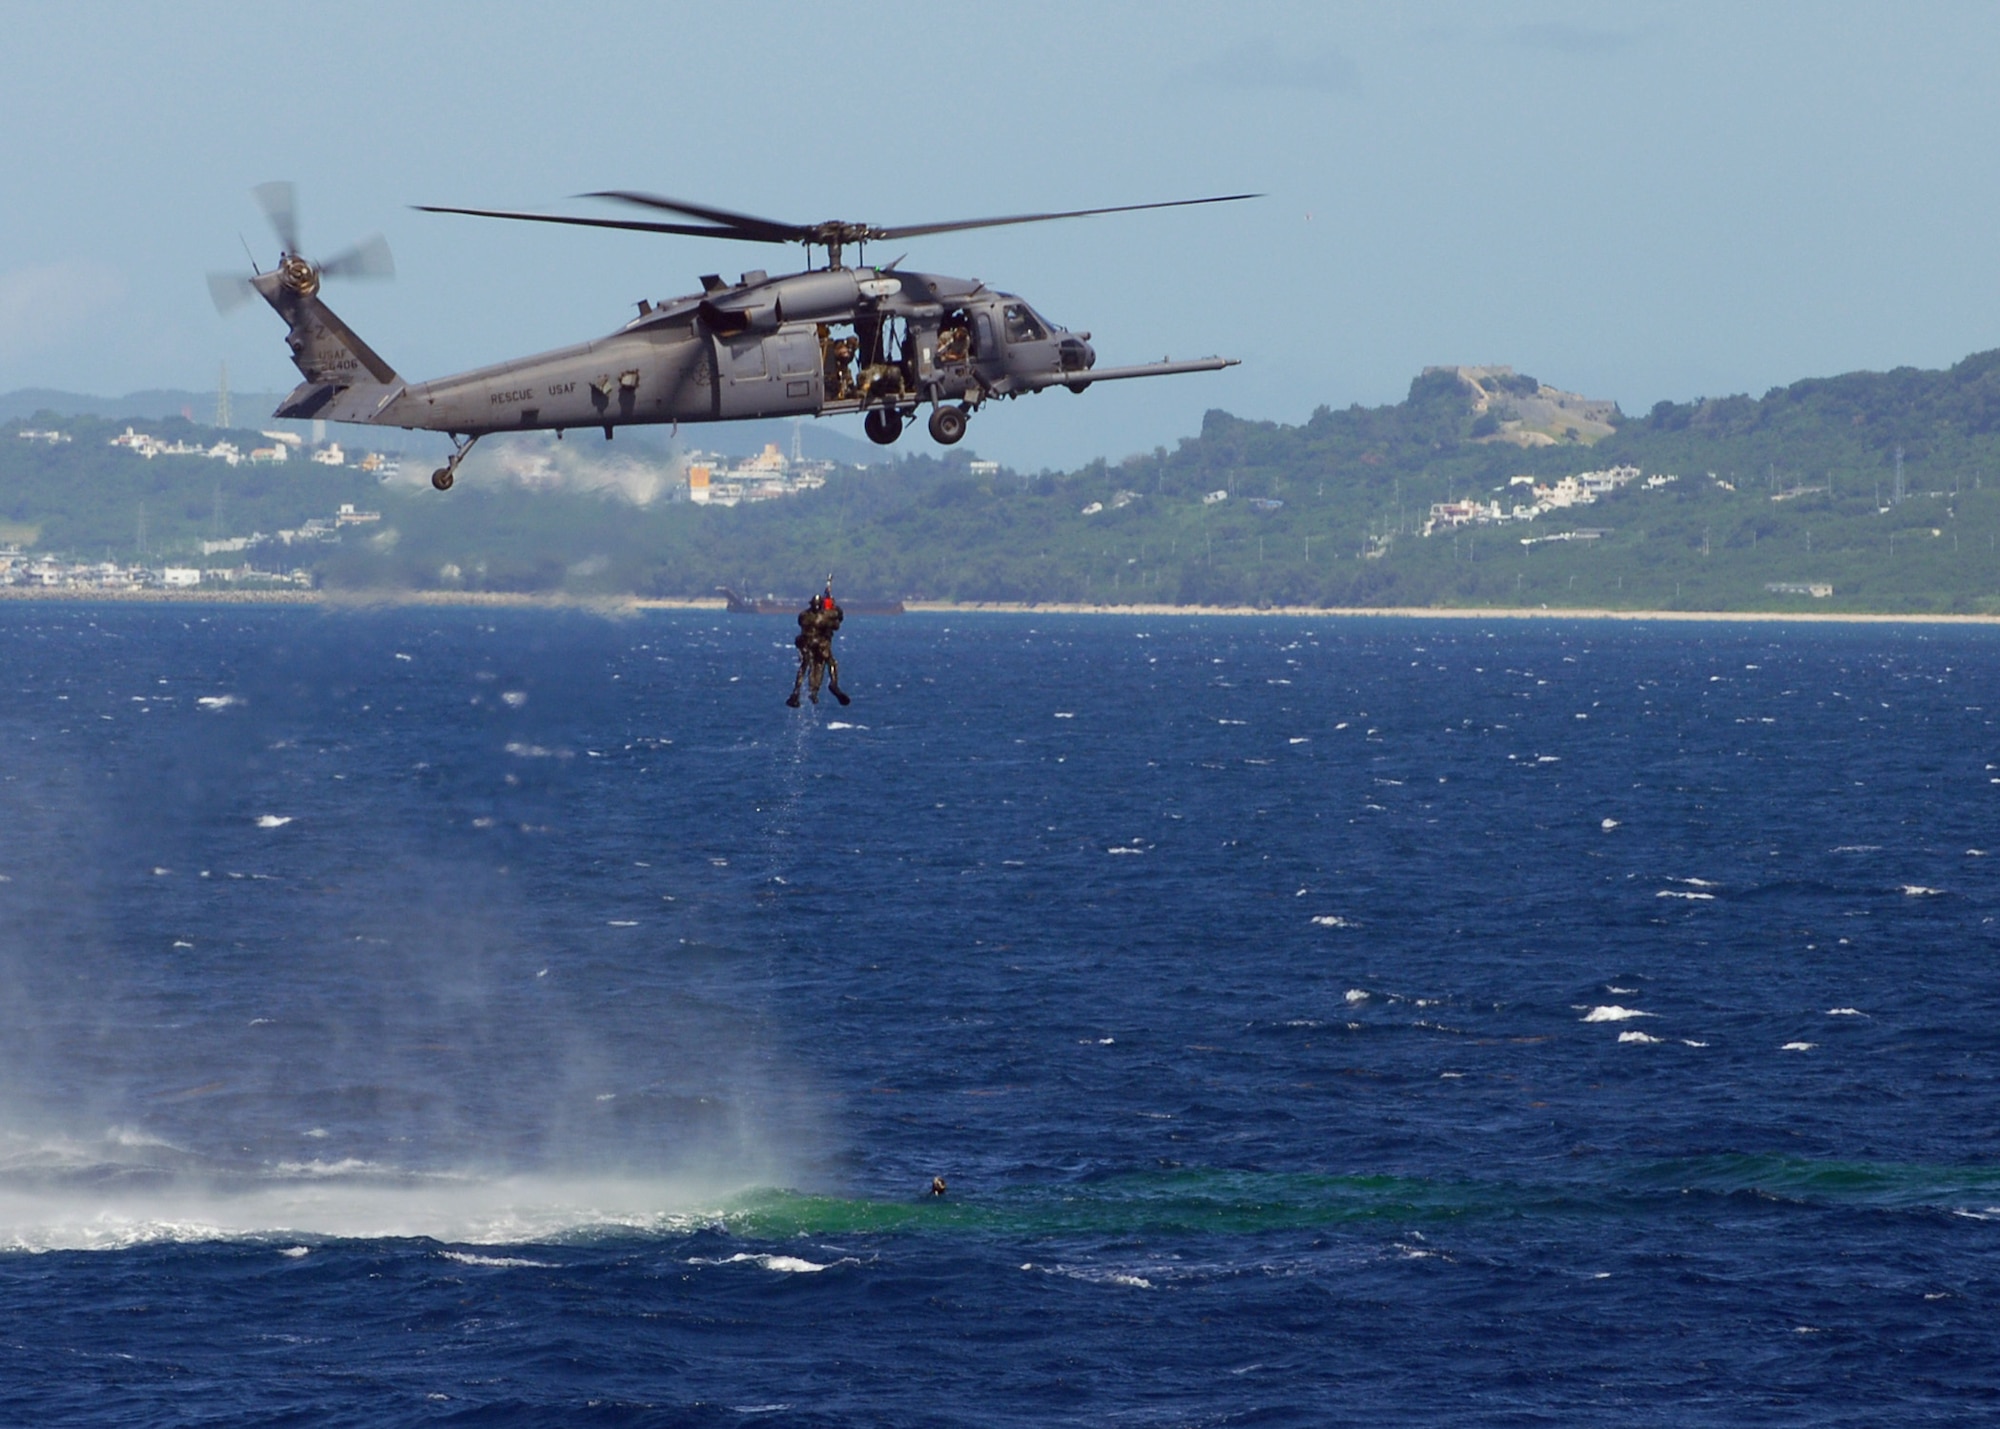 The 33rd Rescue Squadron hovers over one of two downed pilots during a simulated crisis management exercise off the coast of Okinawa Oct. 8, 2008. U.S. Air Force and Japanese Coast Guard assets rehearsed response procedures for an over the water aircraft accident. (U.S. Air Force photo/Airman 1st Class Amanda Grabiec)